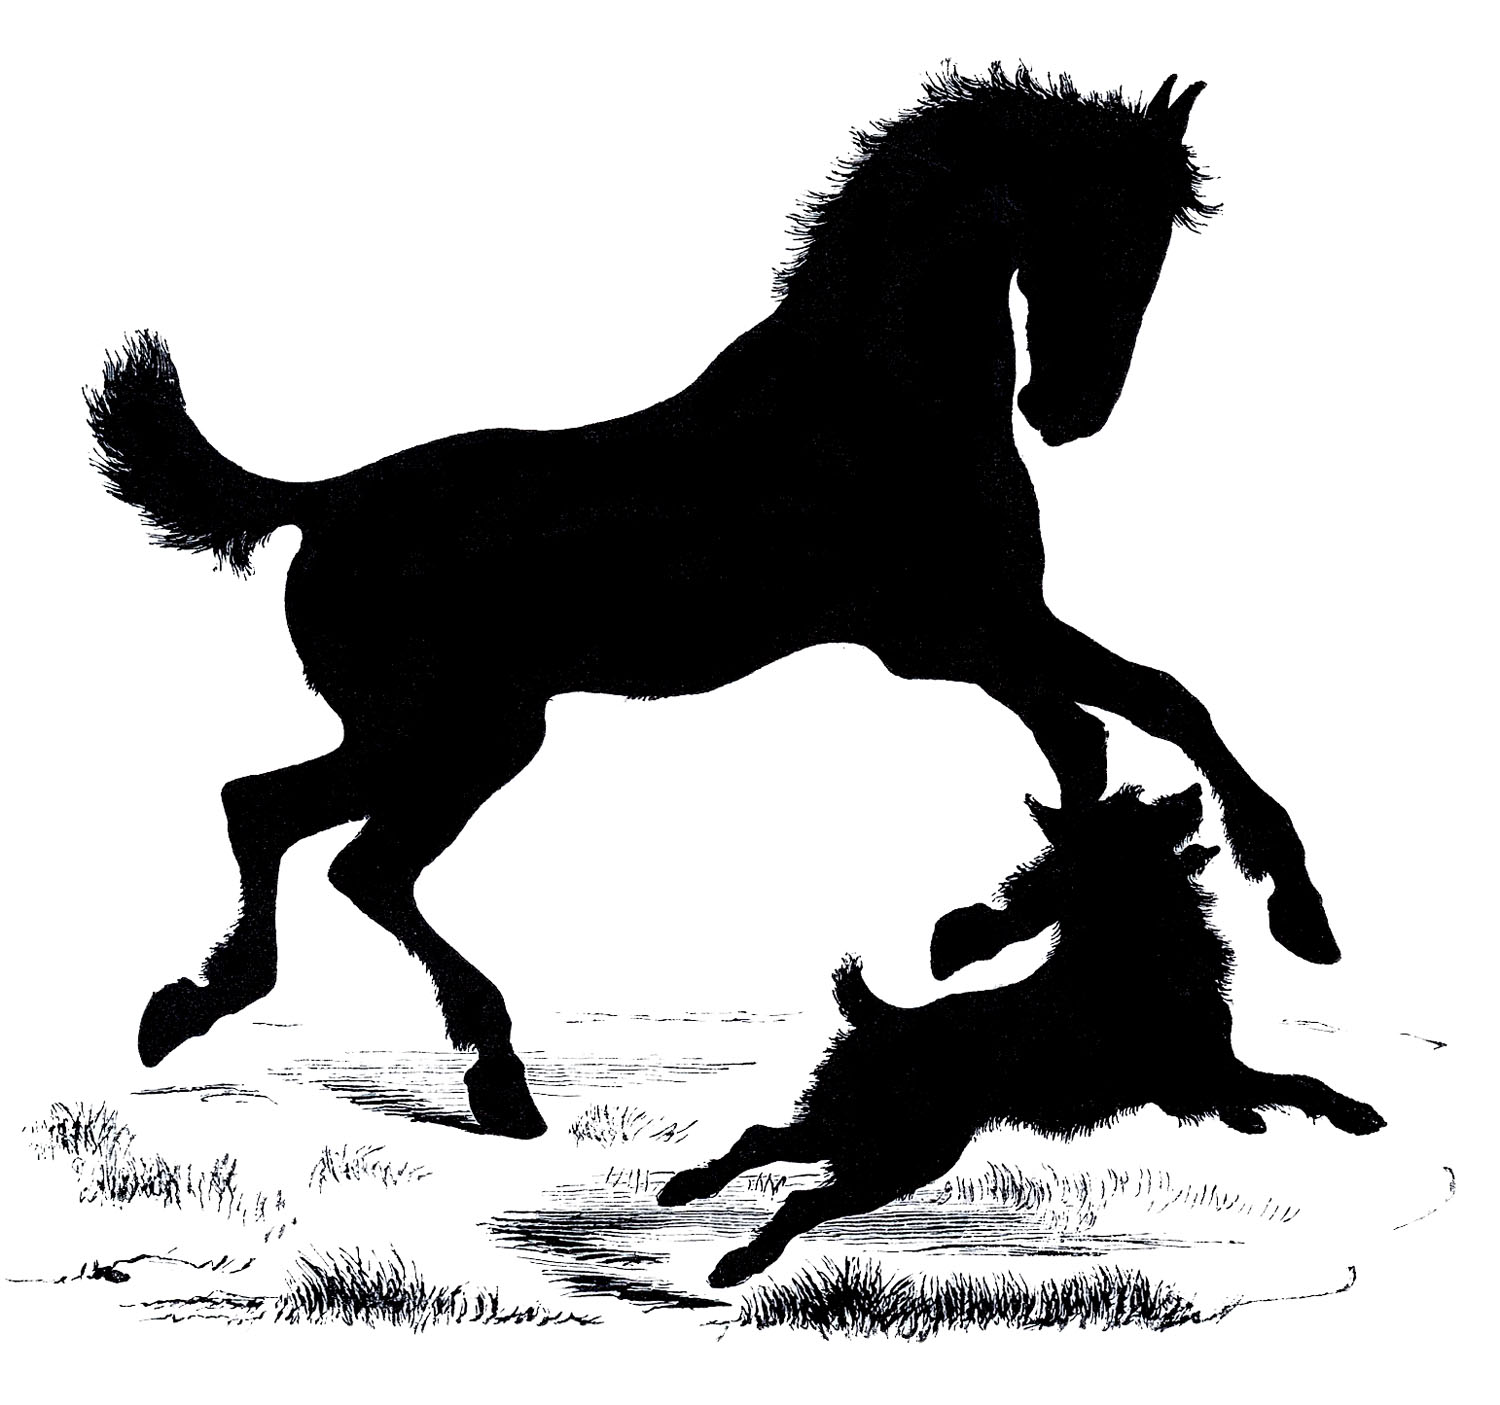 Download Free Vector Downloads - Silhouette Horse and Dog - The ...